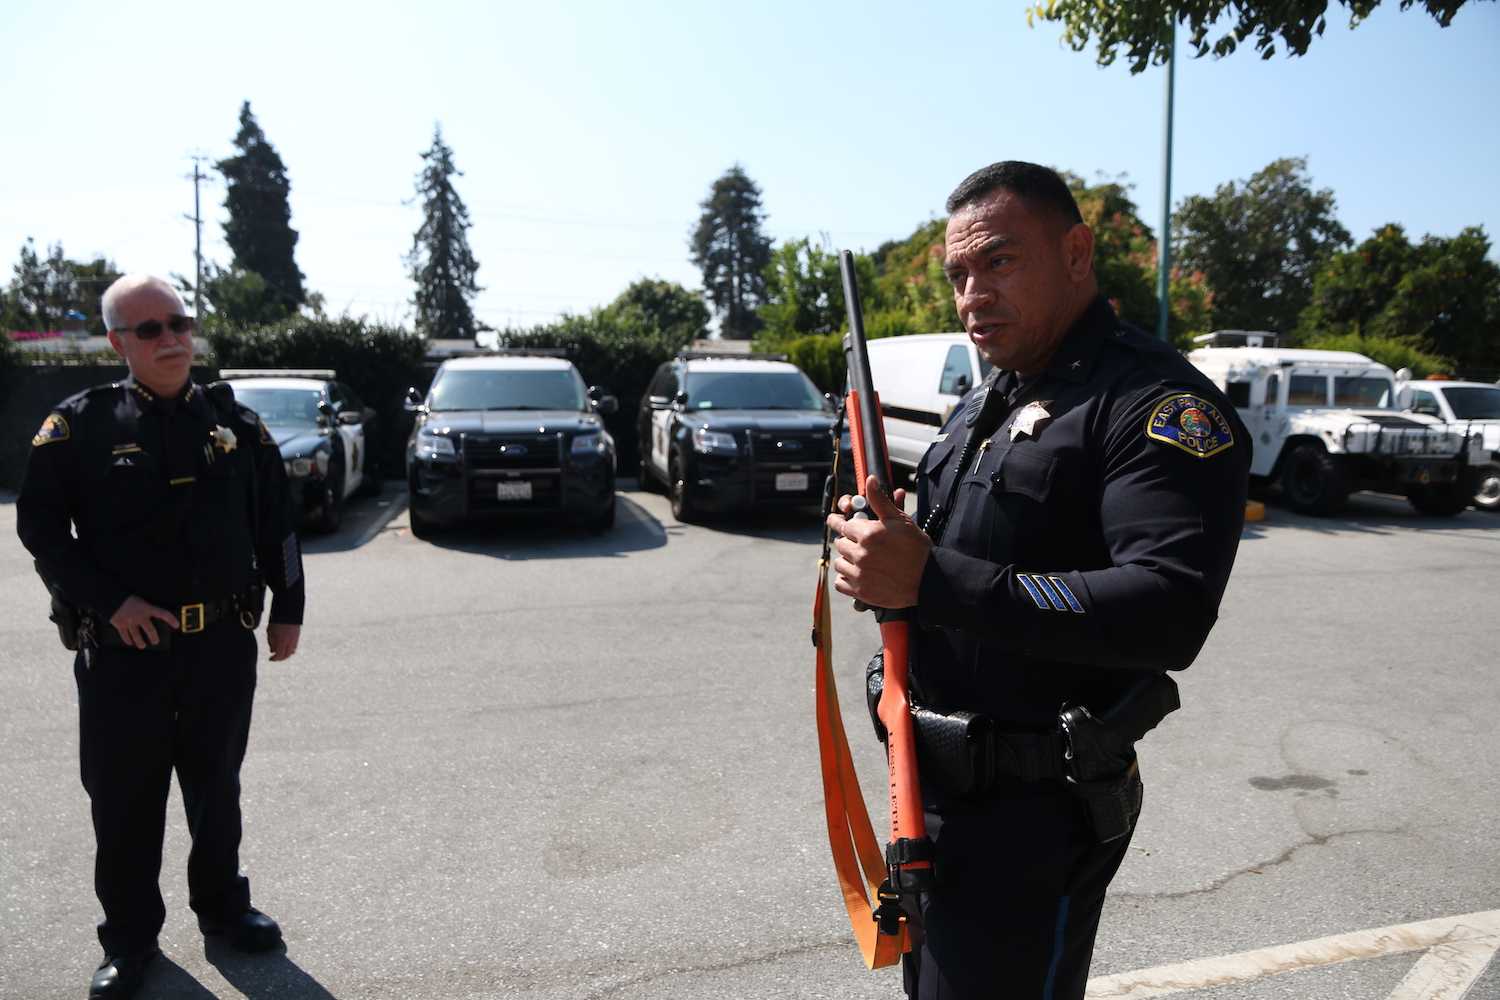 Non-lethal options: East Palo Alto council drops proposal to equip officers with tasers